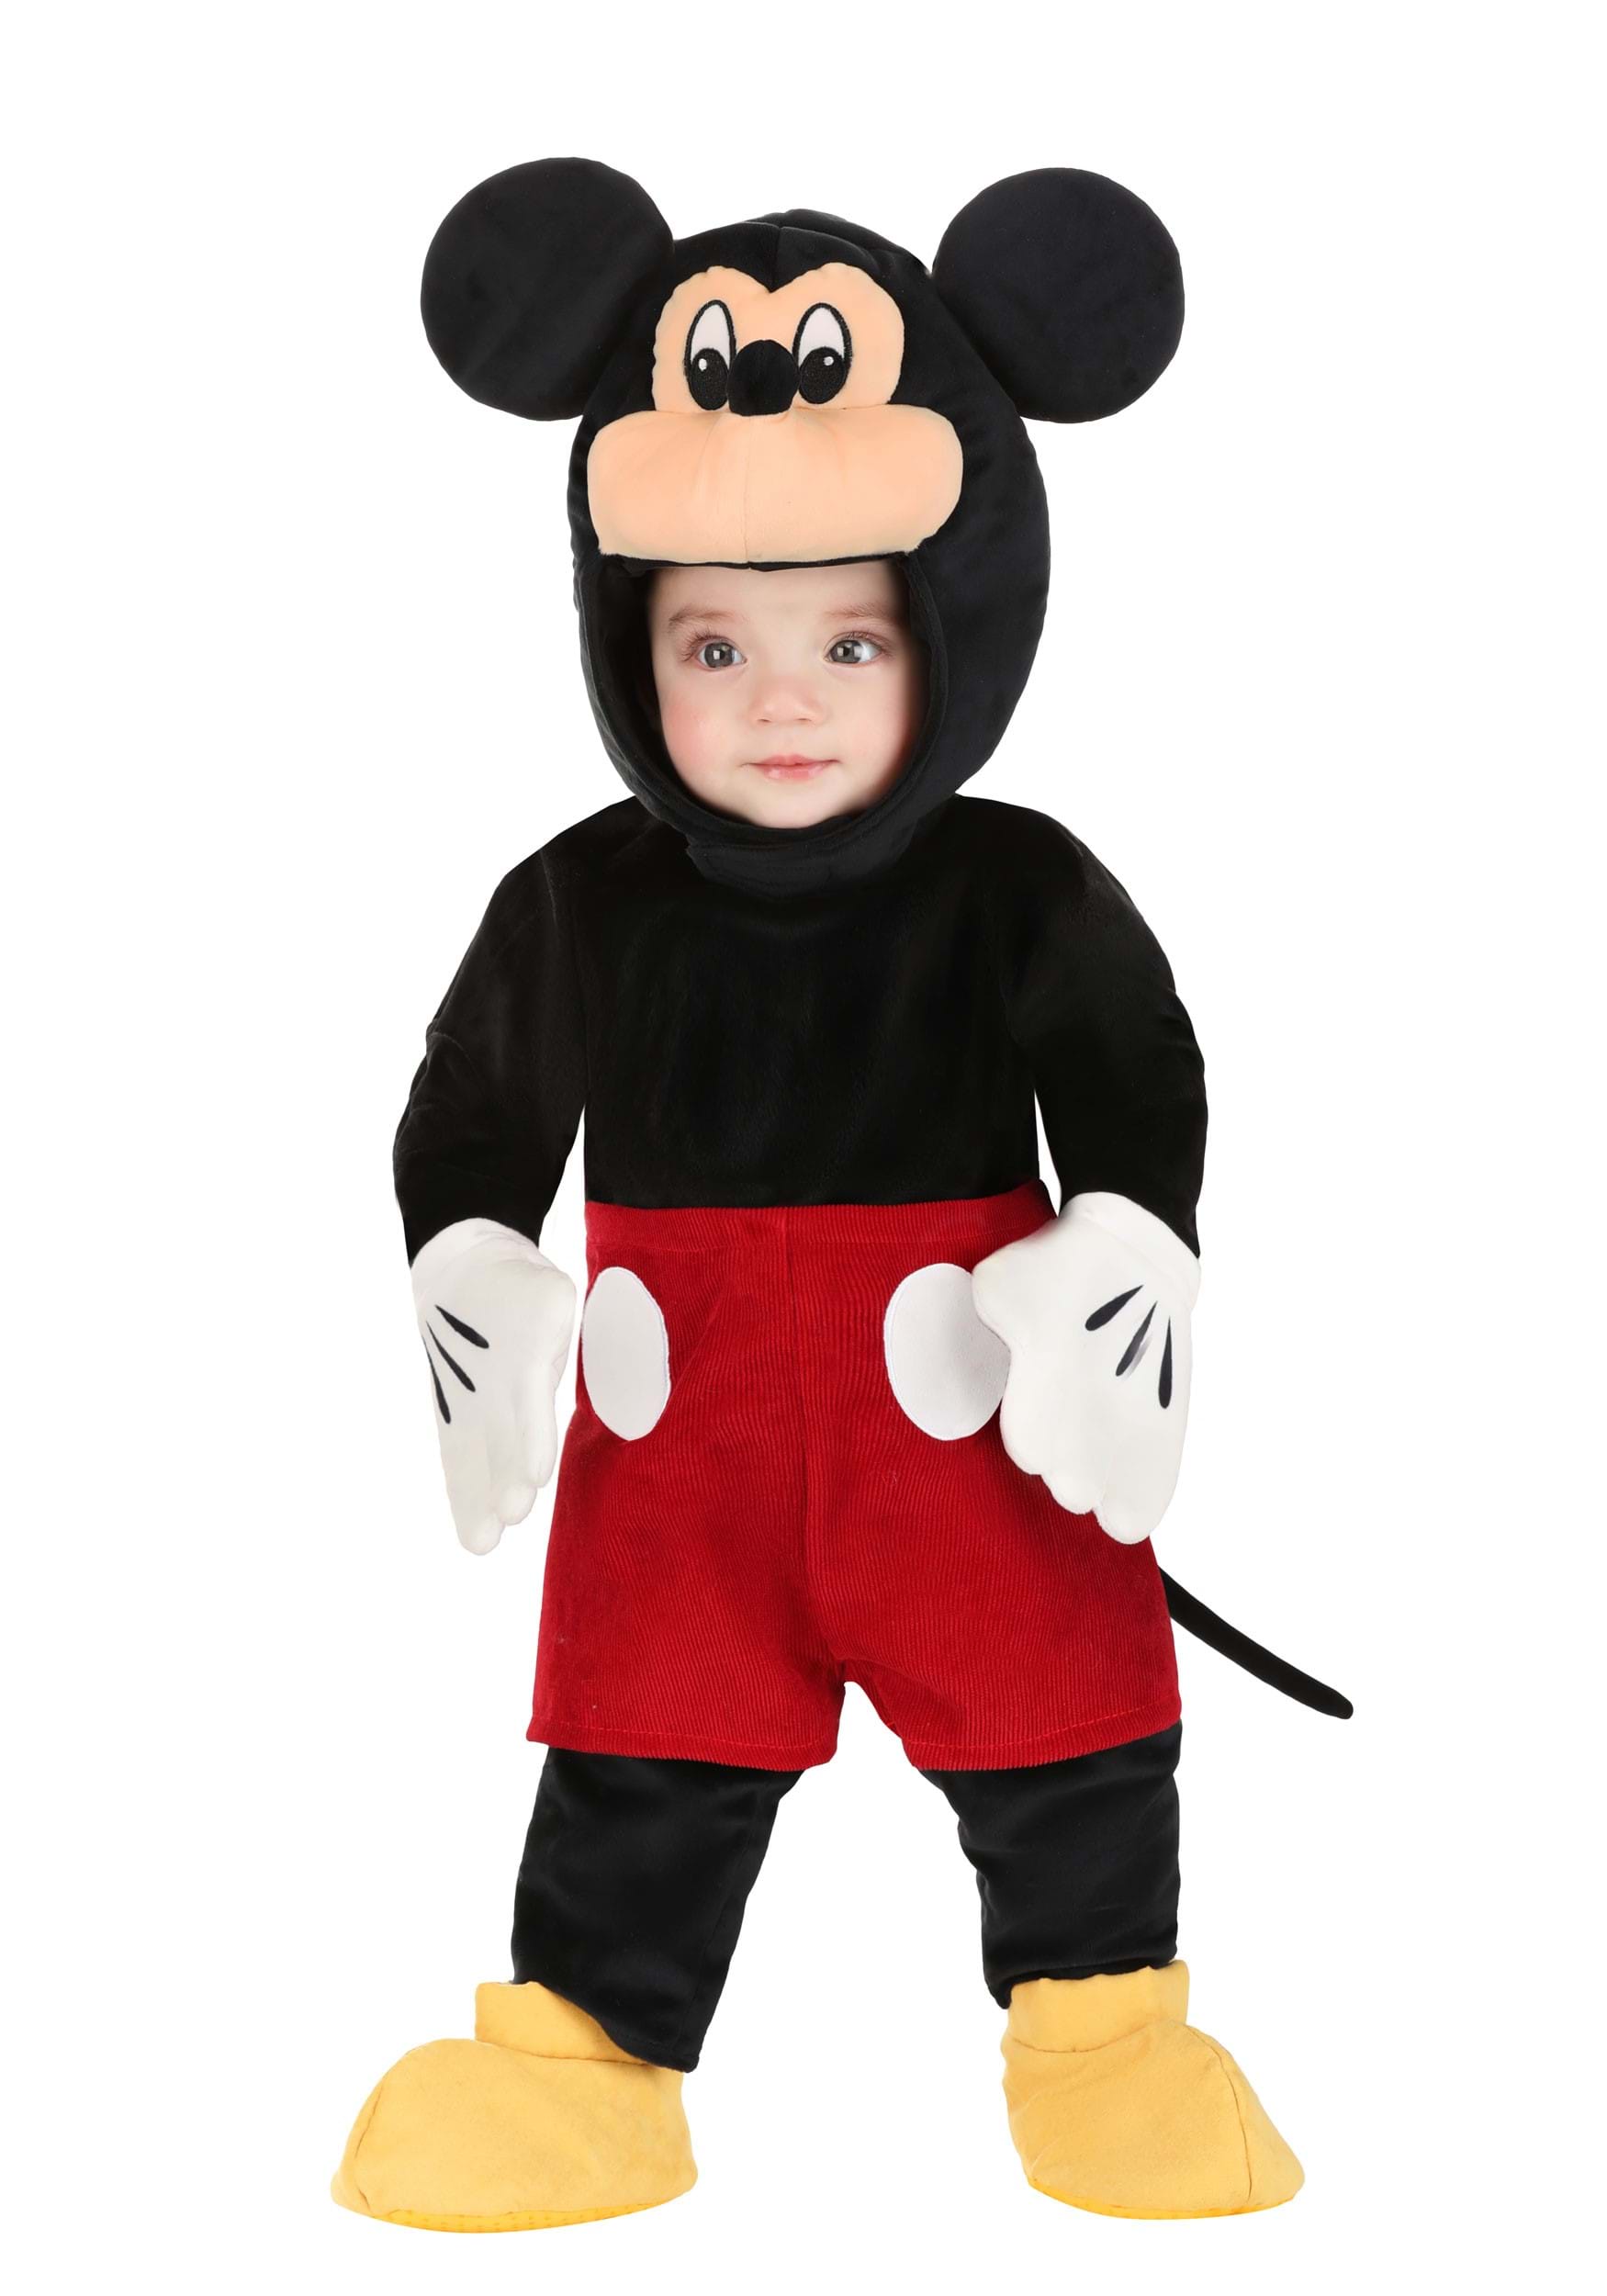 Photos - Fancy Dress FUN Costumes Snuggly Mickey Mouse Infant Costume Black/Red/Yellow